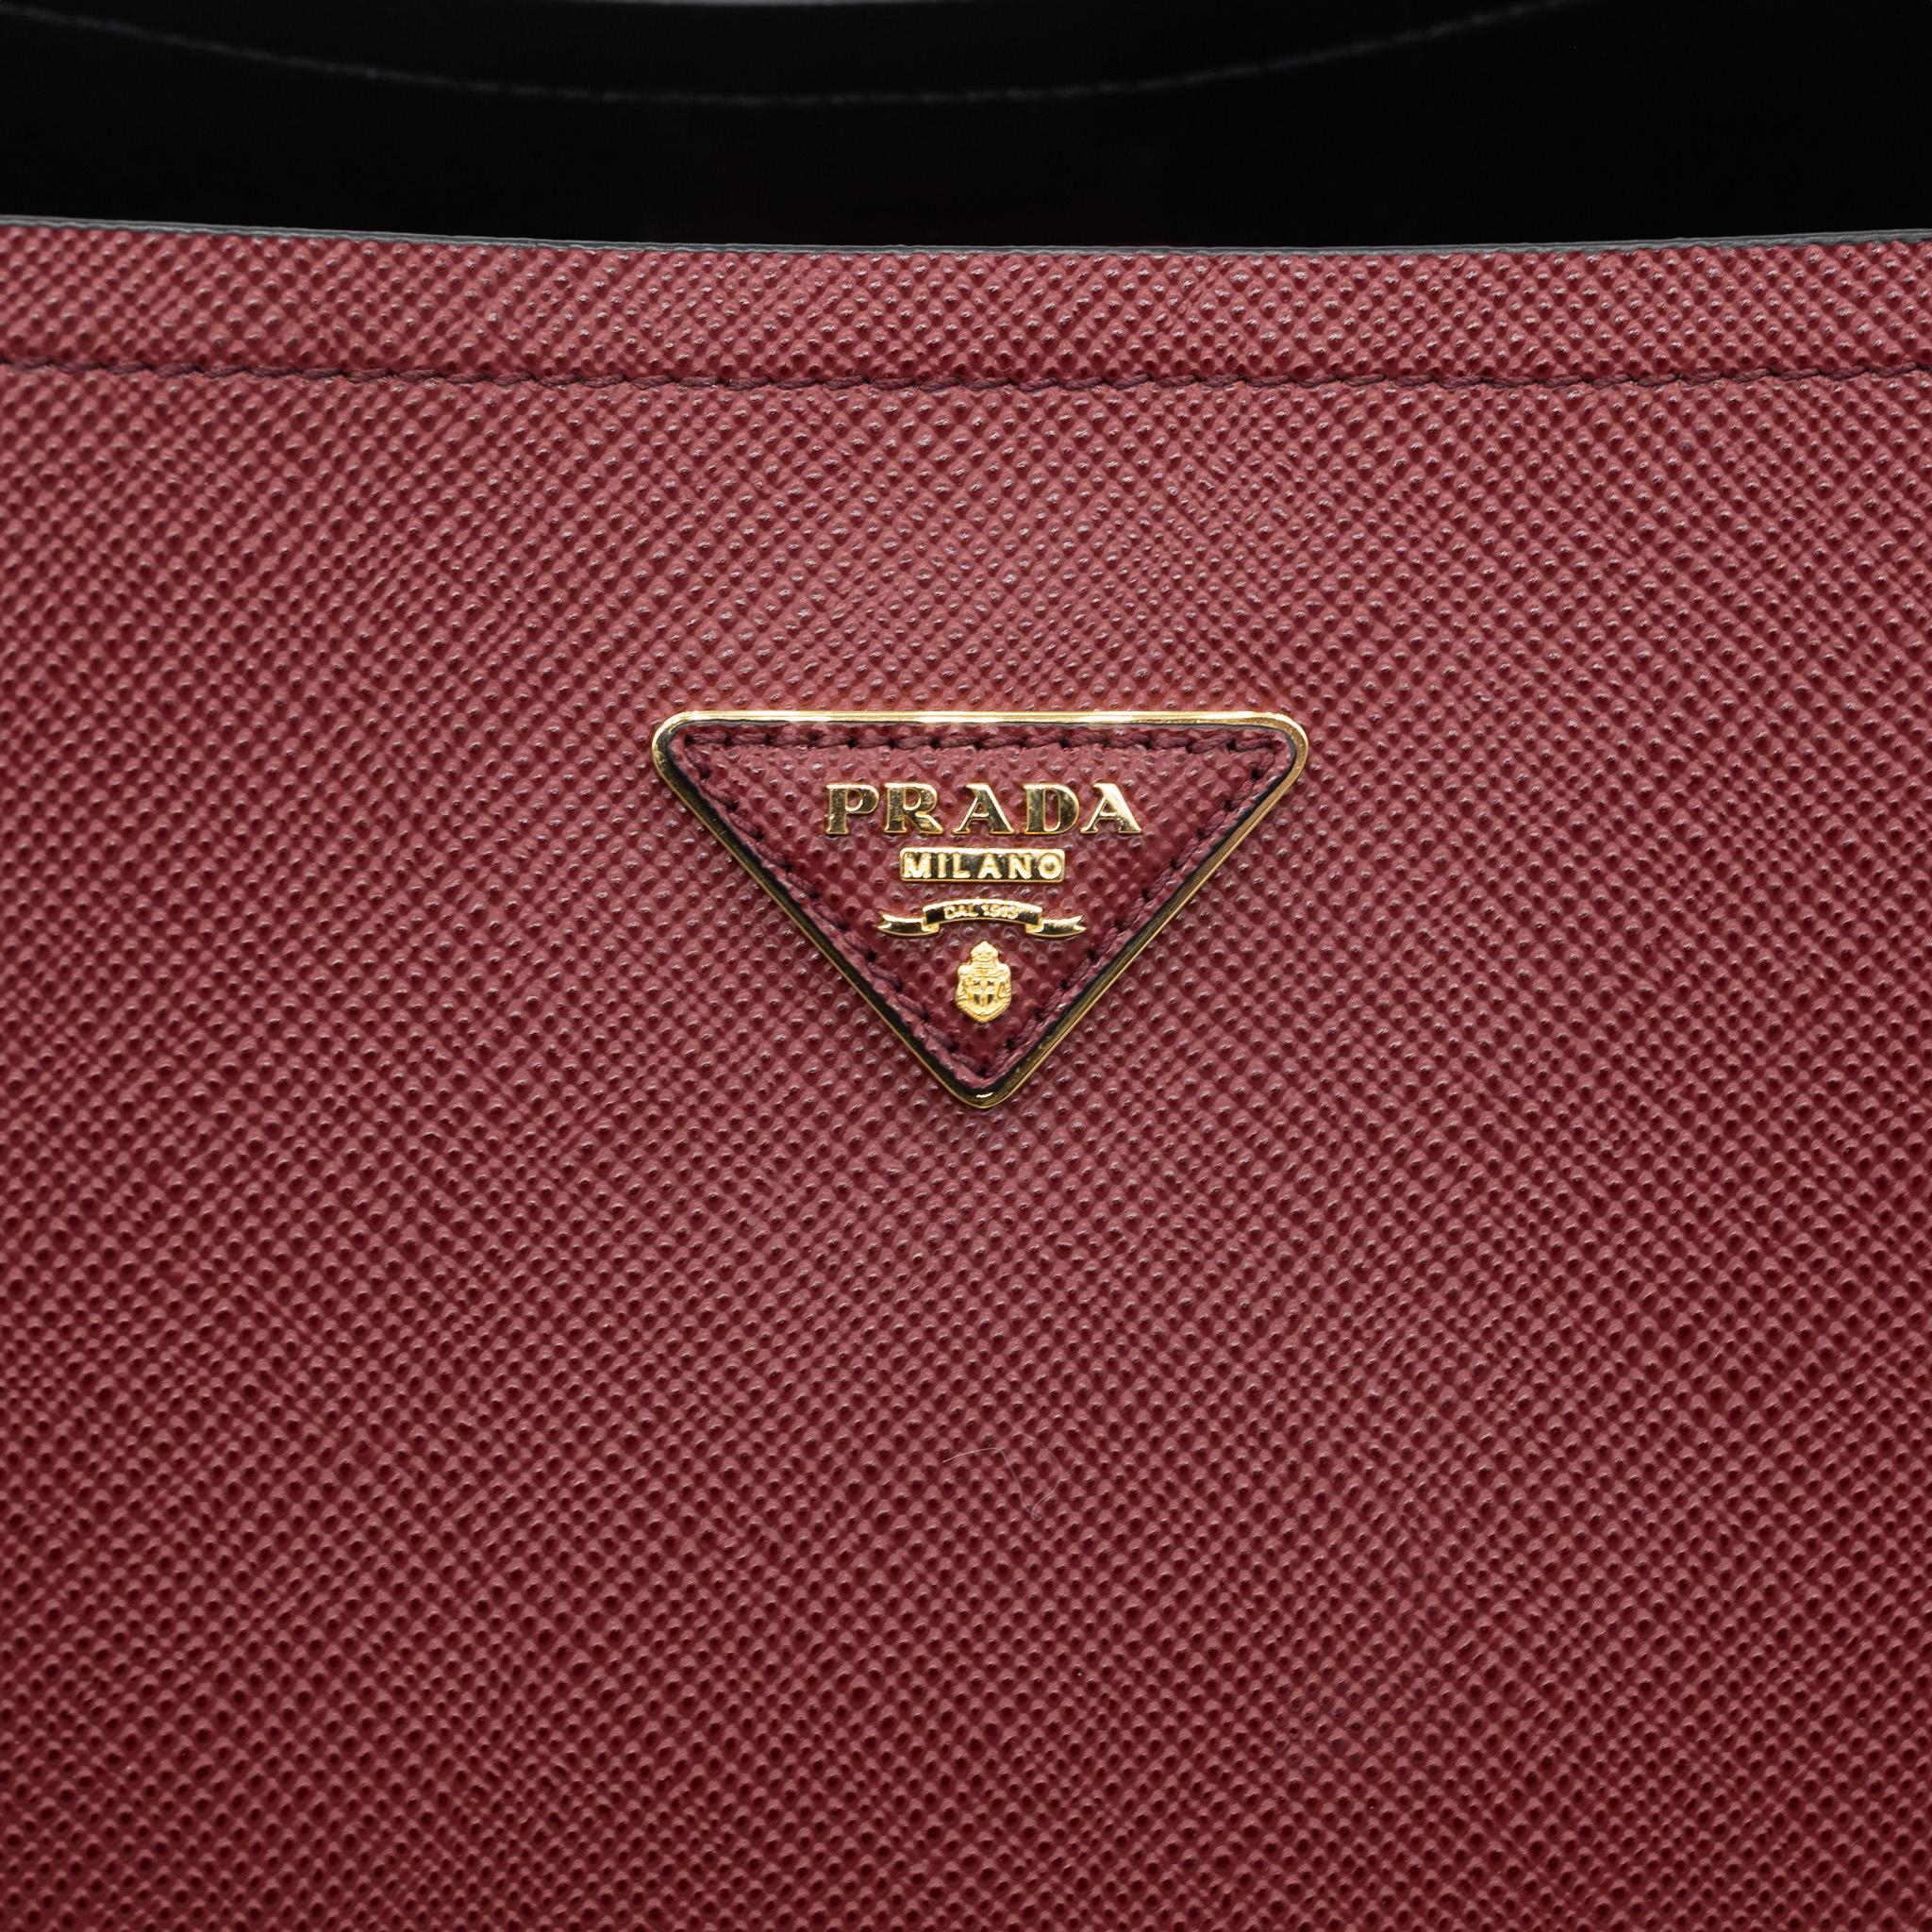 Prada Burgundy Matinée Large Saffiano Leather Crossbody Top Handle Bag, 2020. The traditional rounded edge shape of Prada's Matinée bag is a classic yet trendy take on the Prada bag for the new year. This bag was hand crafted in Italy from Prada's